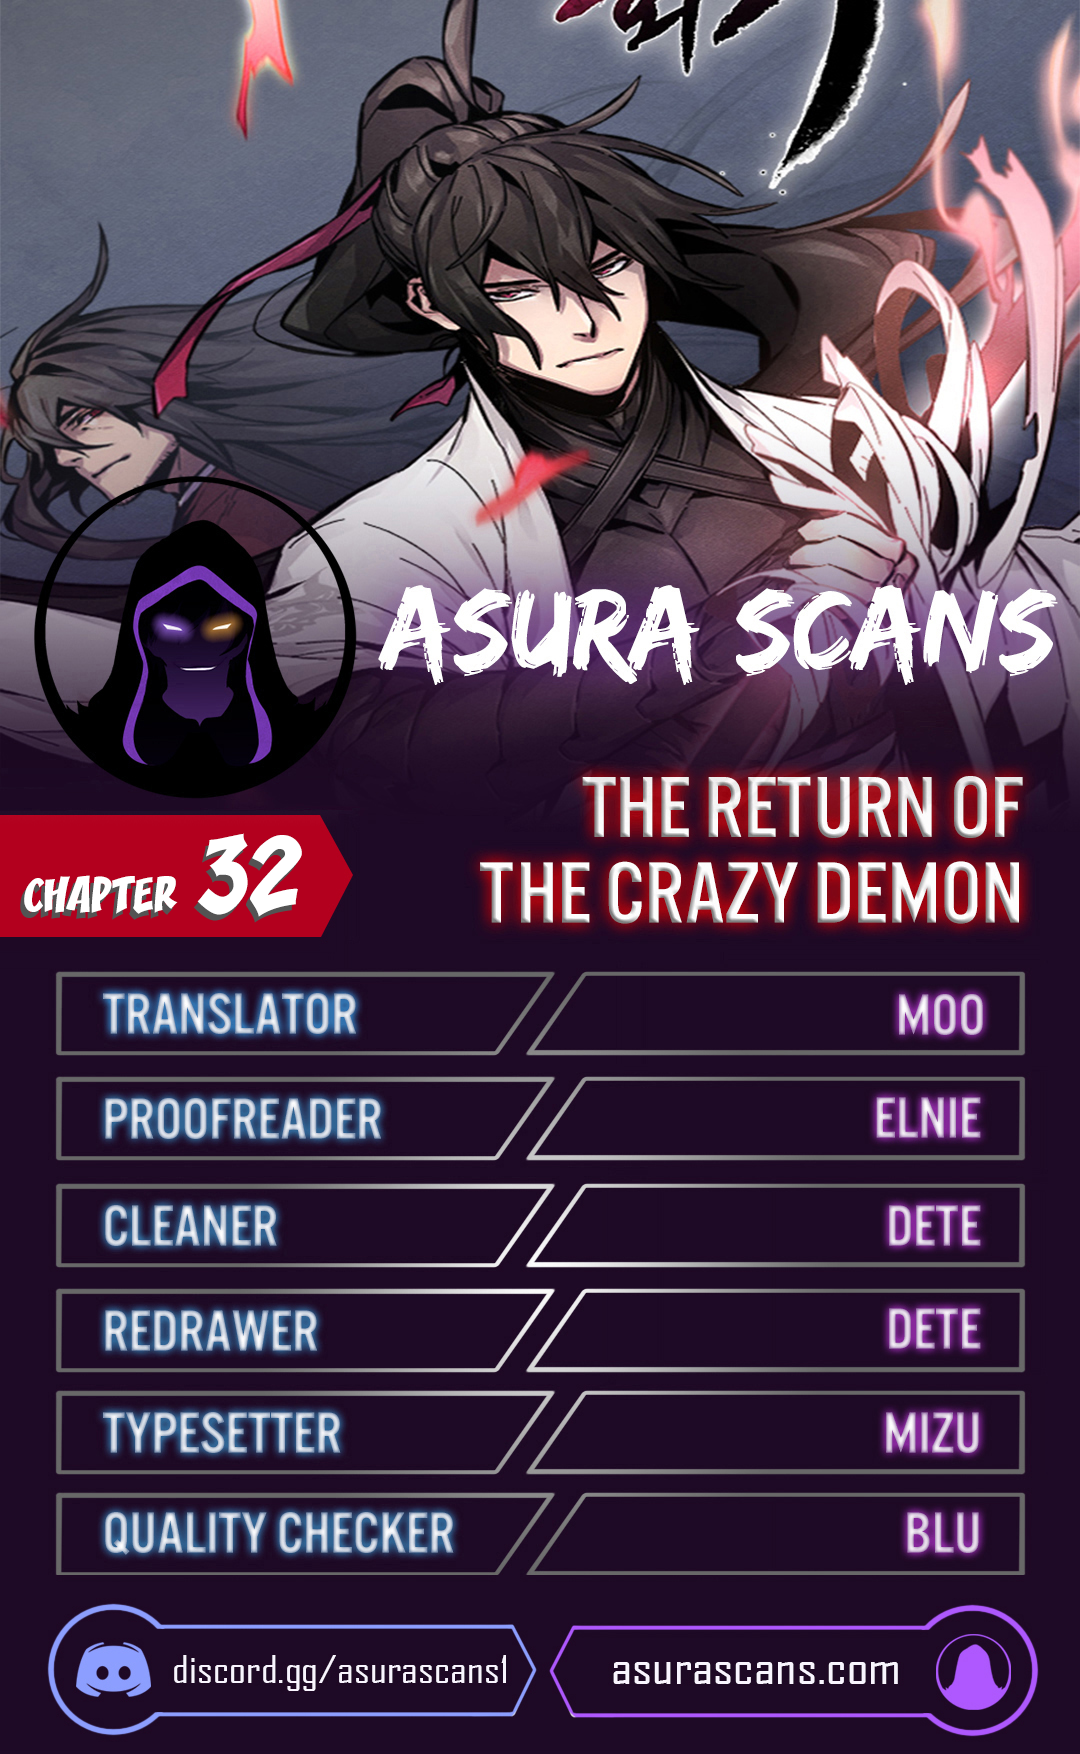 The Return of the Crazy Demon - Chapter 18573 - Image 1